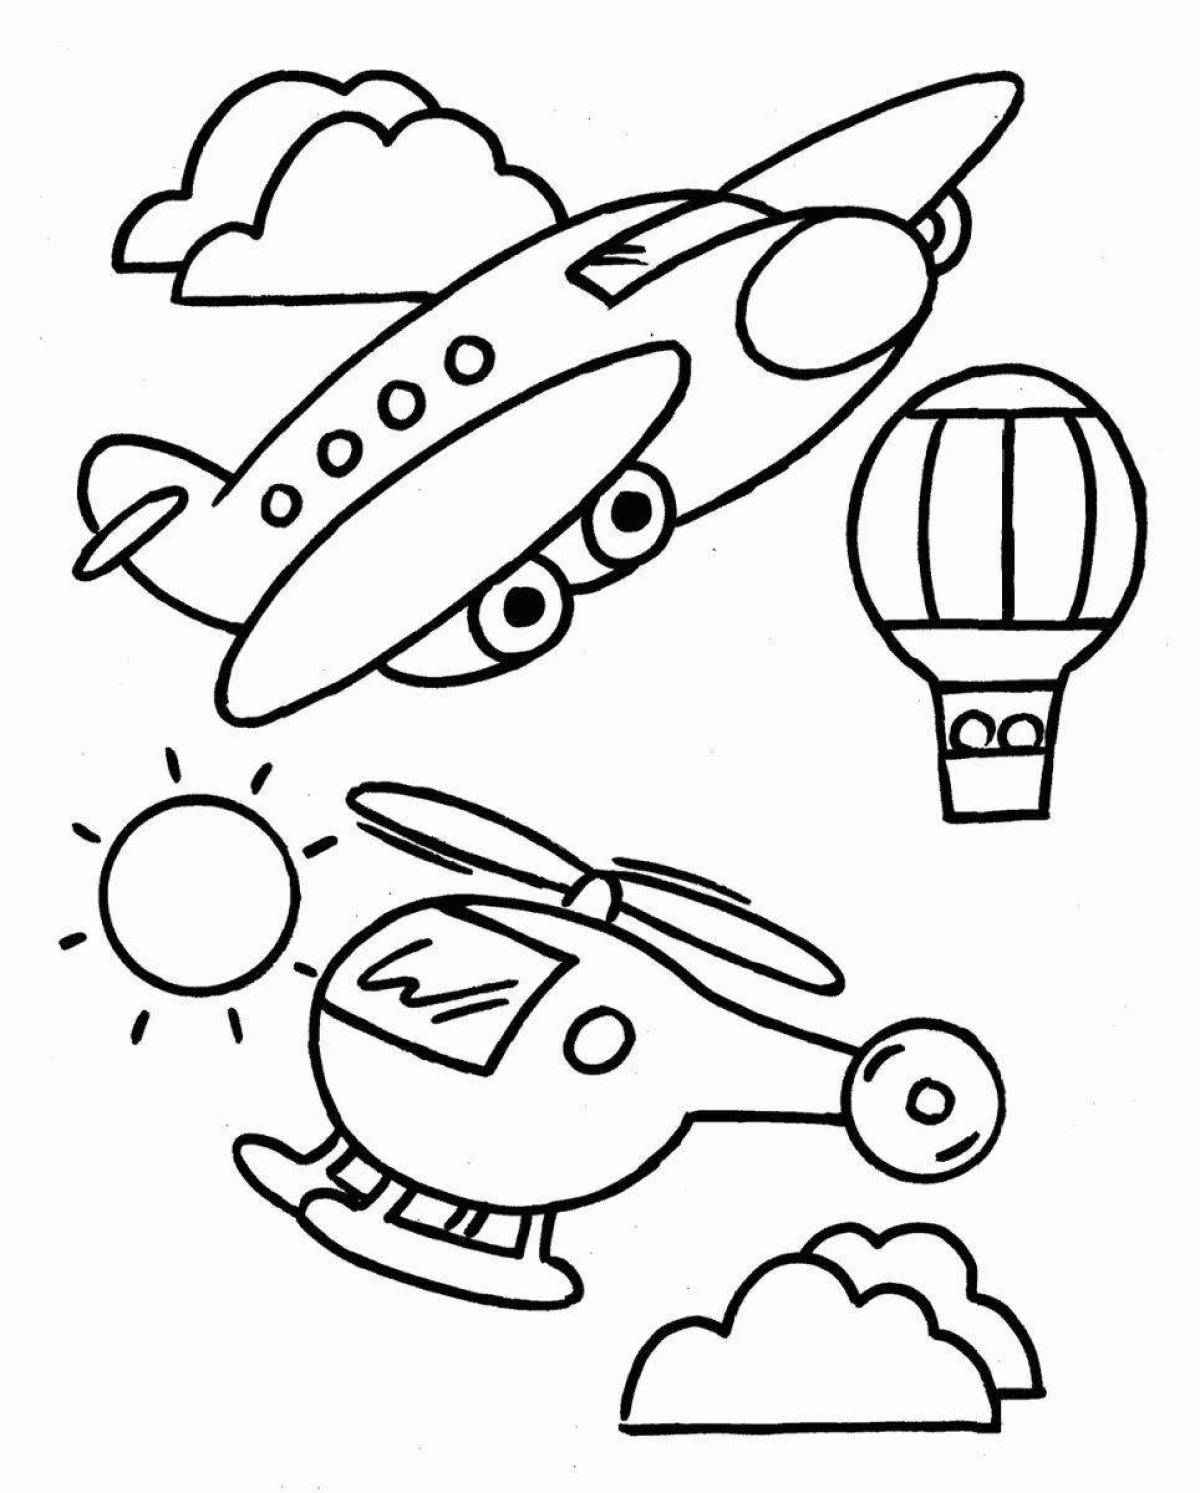 Coloring page adorable transport for boys